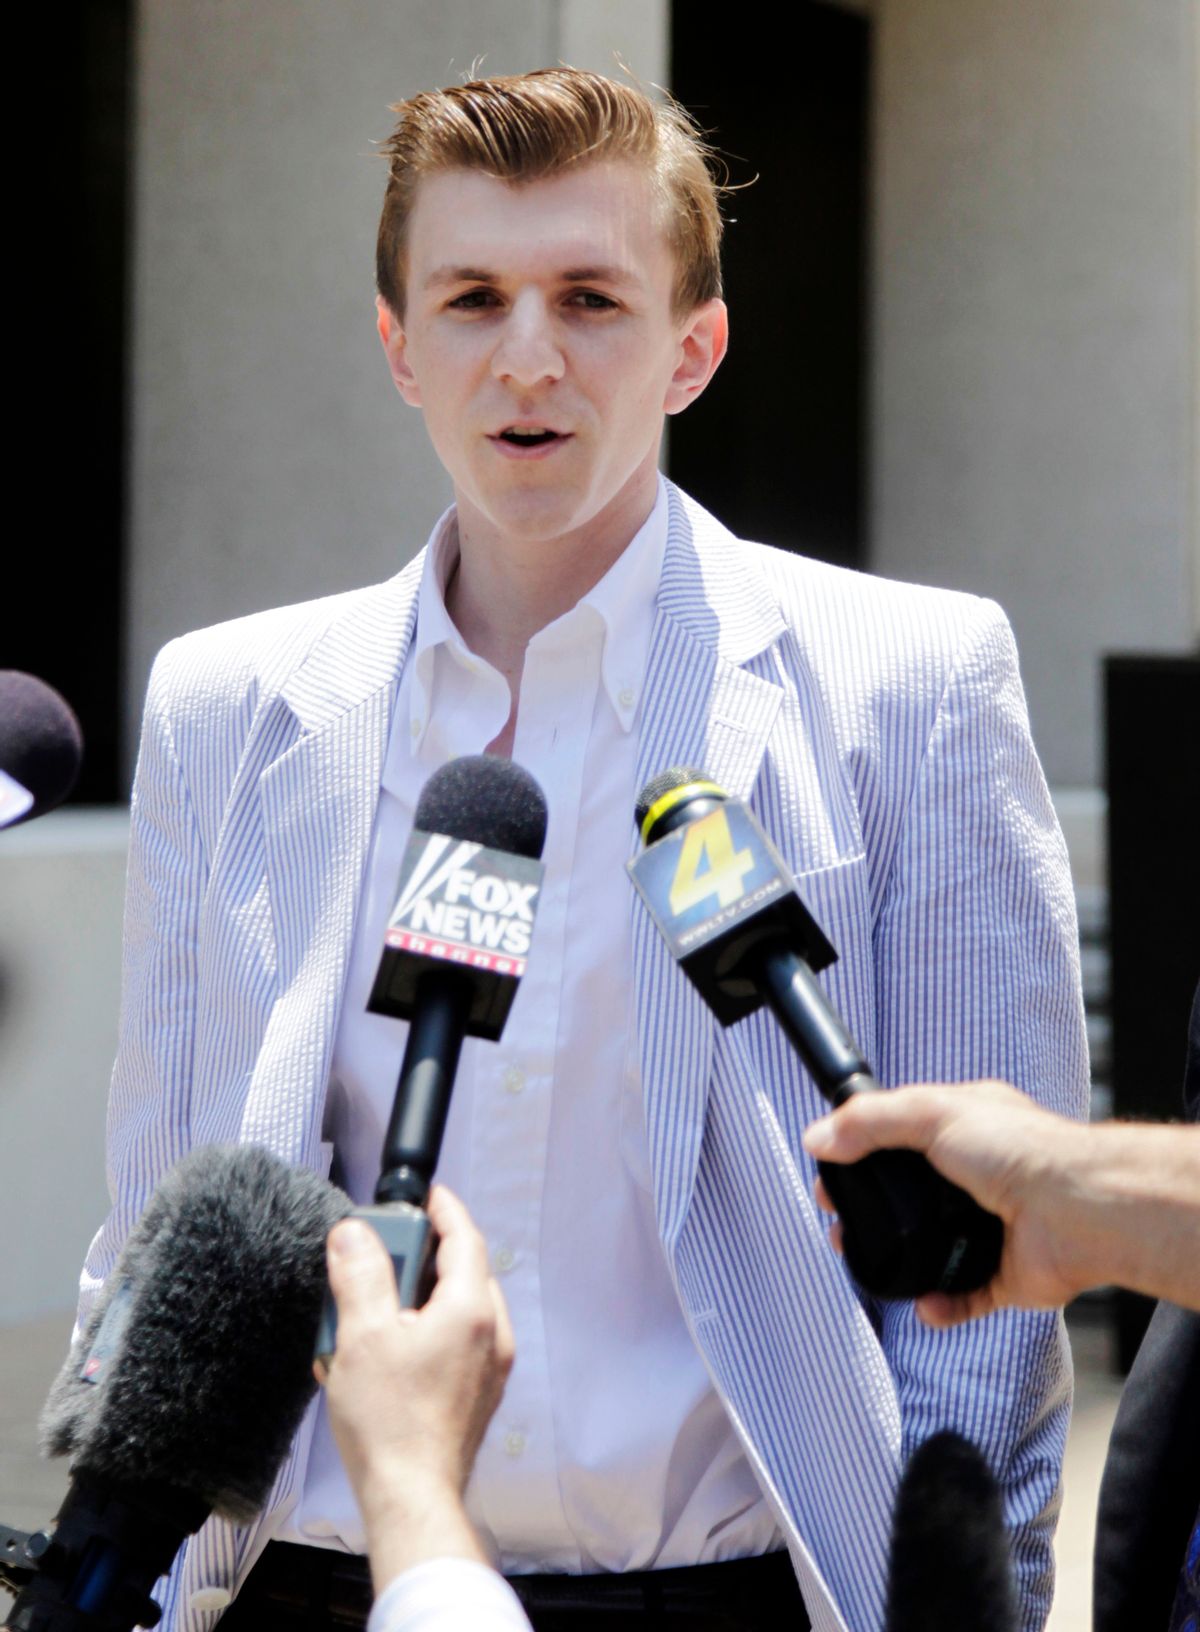 James O'Keefe makes a statement after leaving the federal courthouse in New Orleans, Wednesday, May 26, 2010. O'Keefe who was accused of trying to tamper with the phones in Sen. Mary Landrieu's New Orleans office was sentenced to three years probation, 100 hours of community service and a $1,500 fine, after pleading guilty to misdemeanor charges.  (AP Photo/Bill Haber) (Bill Haber)